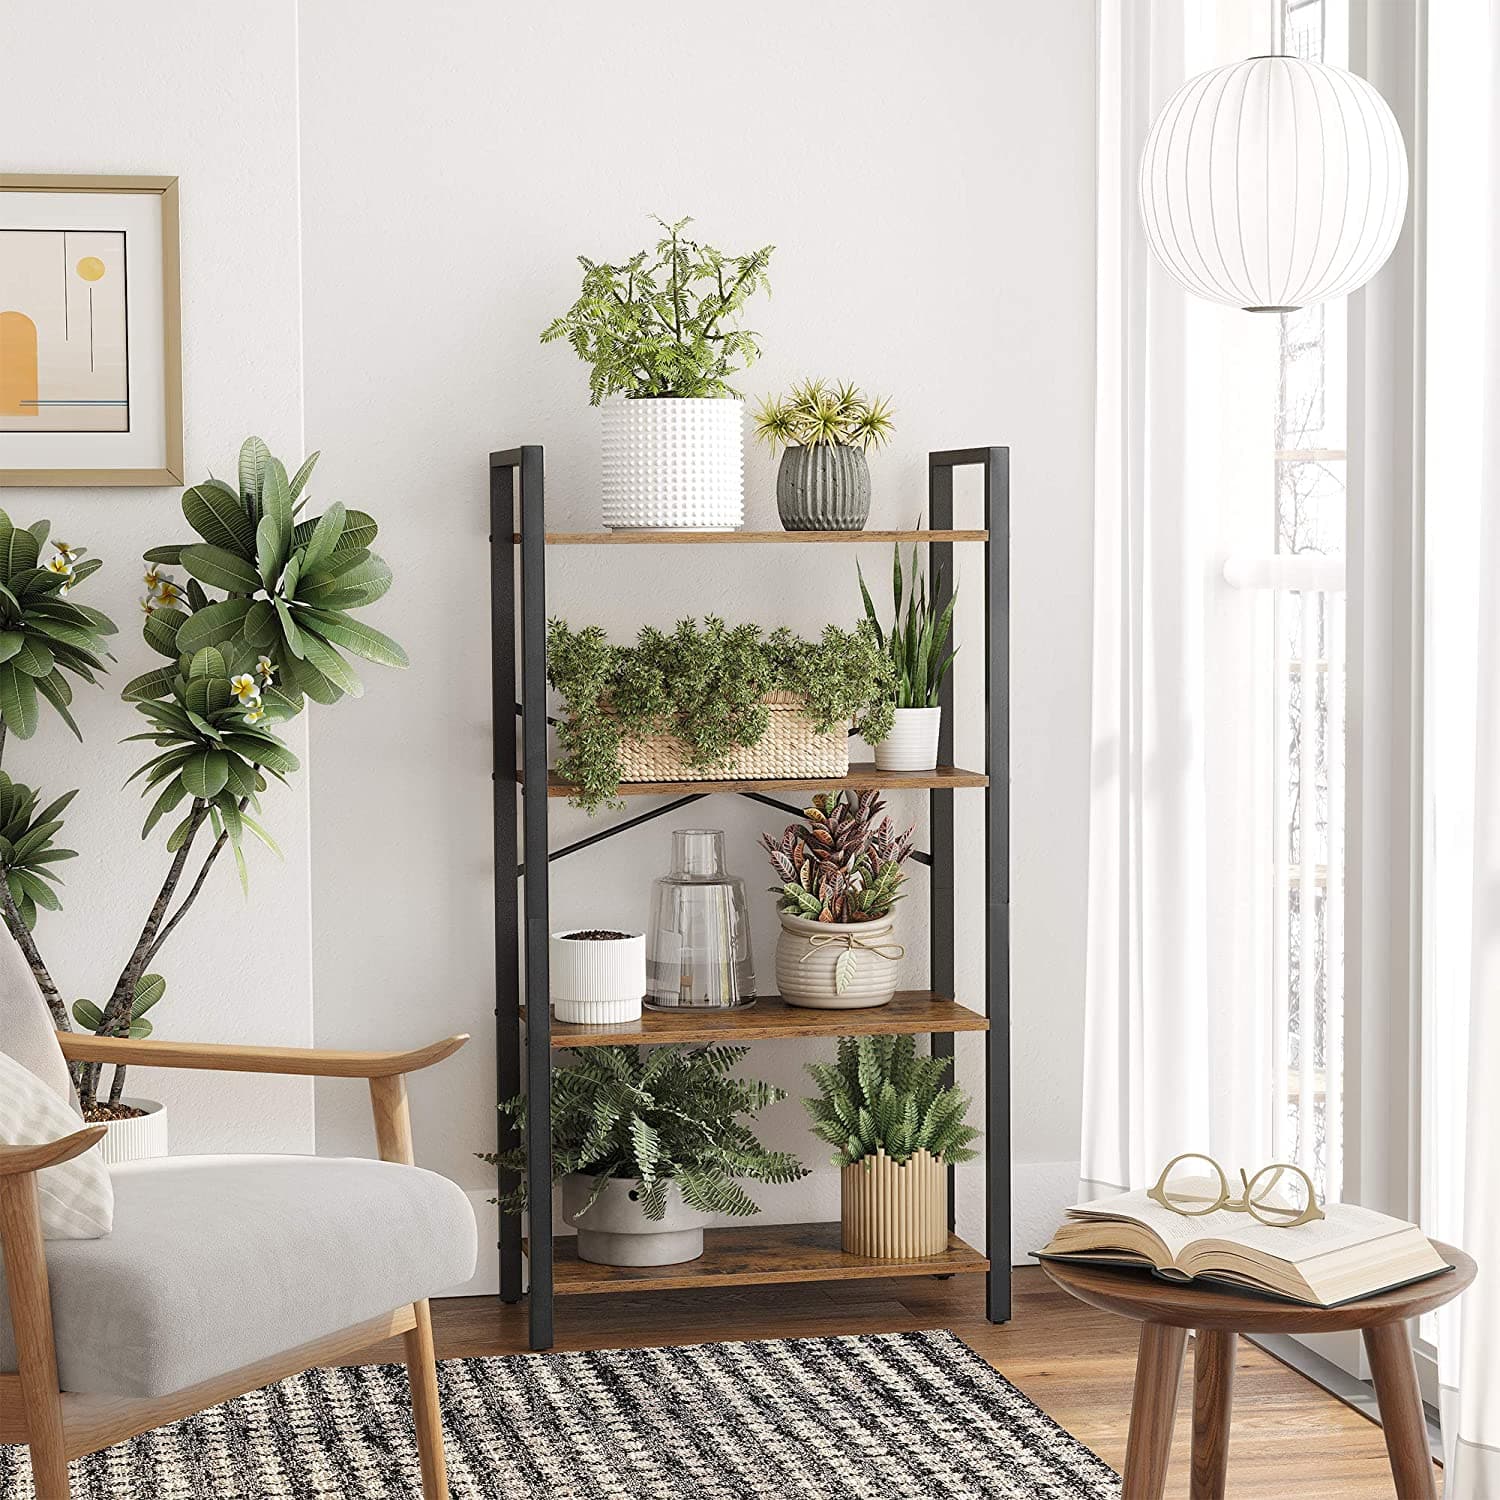 4-Tier Storage Rack with Steel Frame, 120 cm High, Rustic Brown and Black-Bookcases &amp; Shelves-PEROZ Accessories